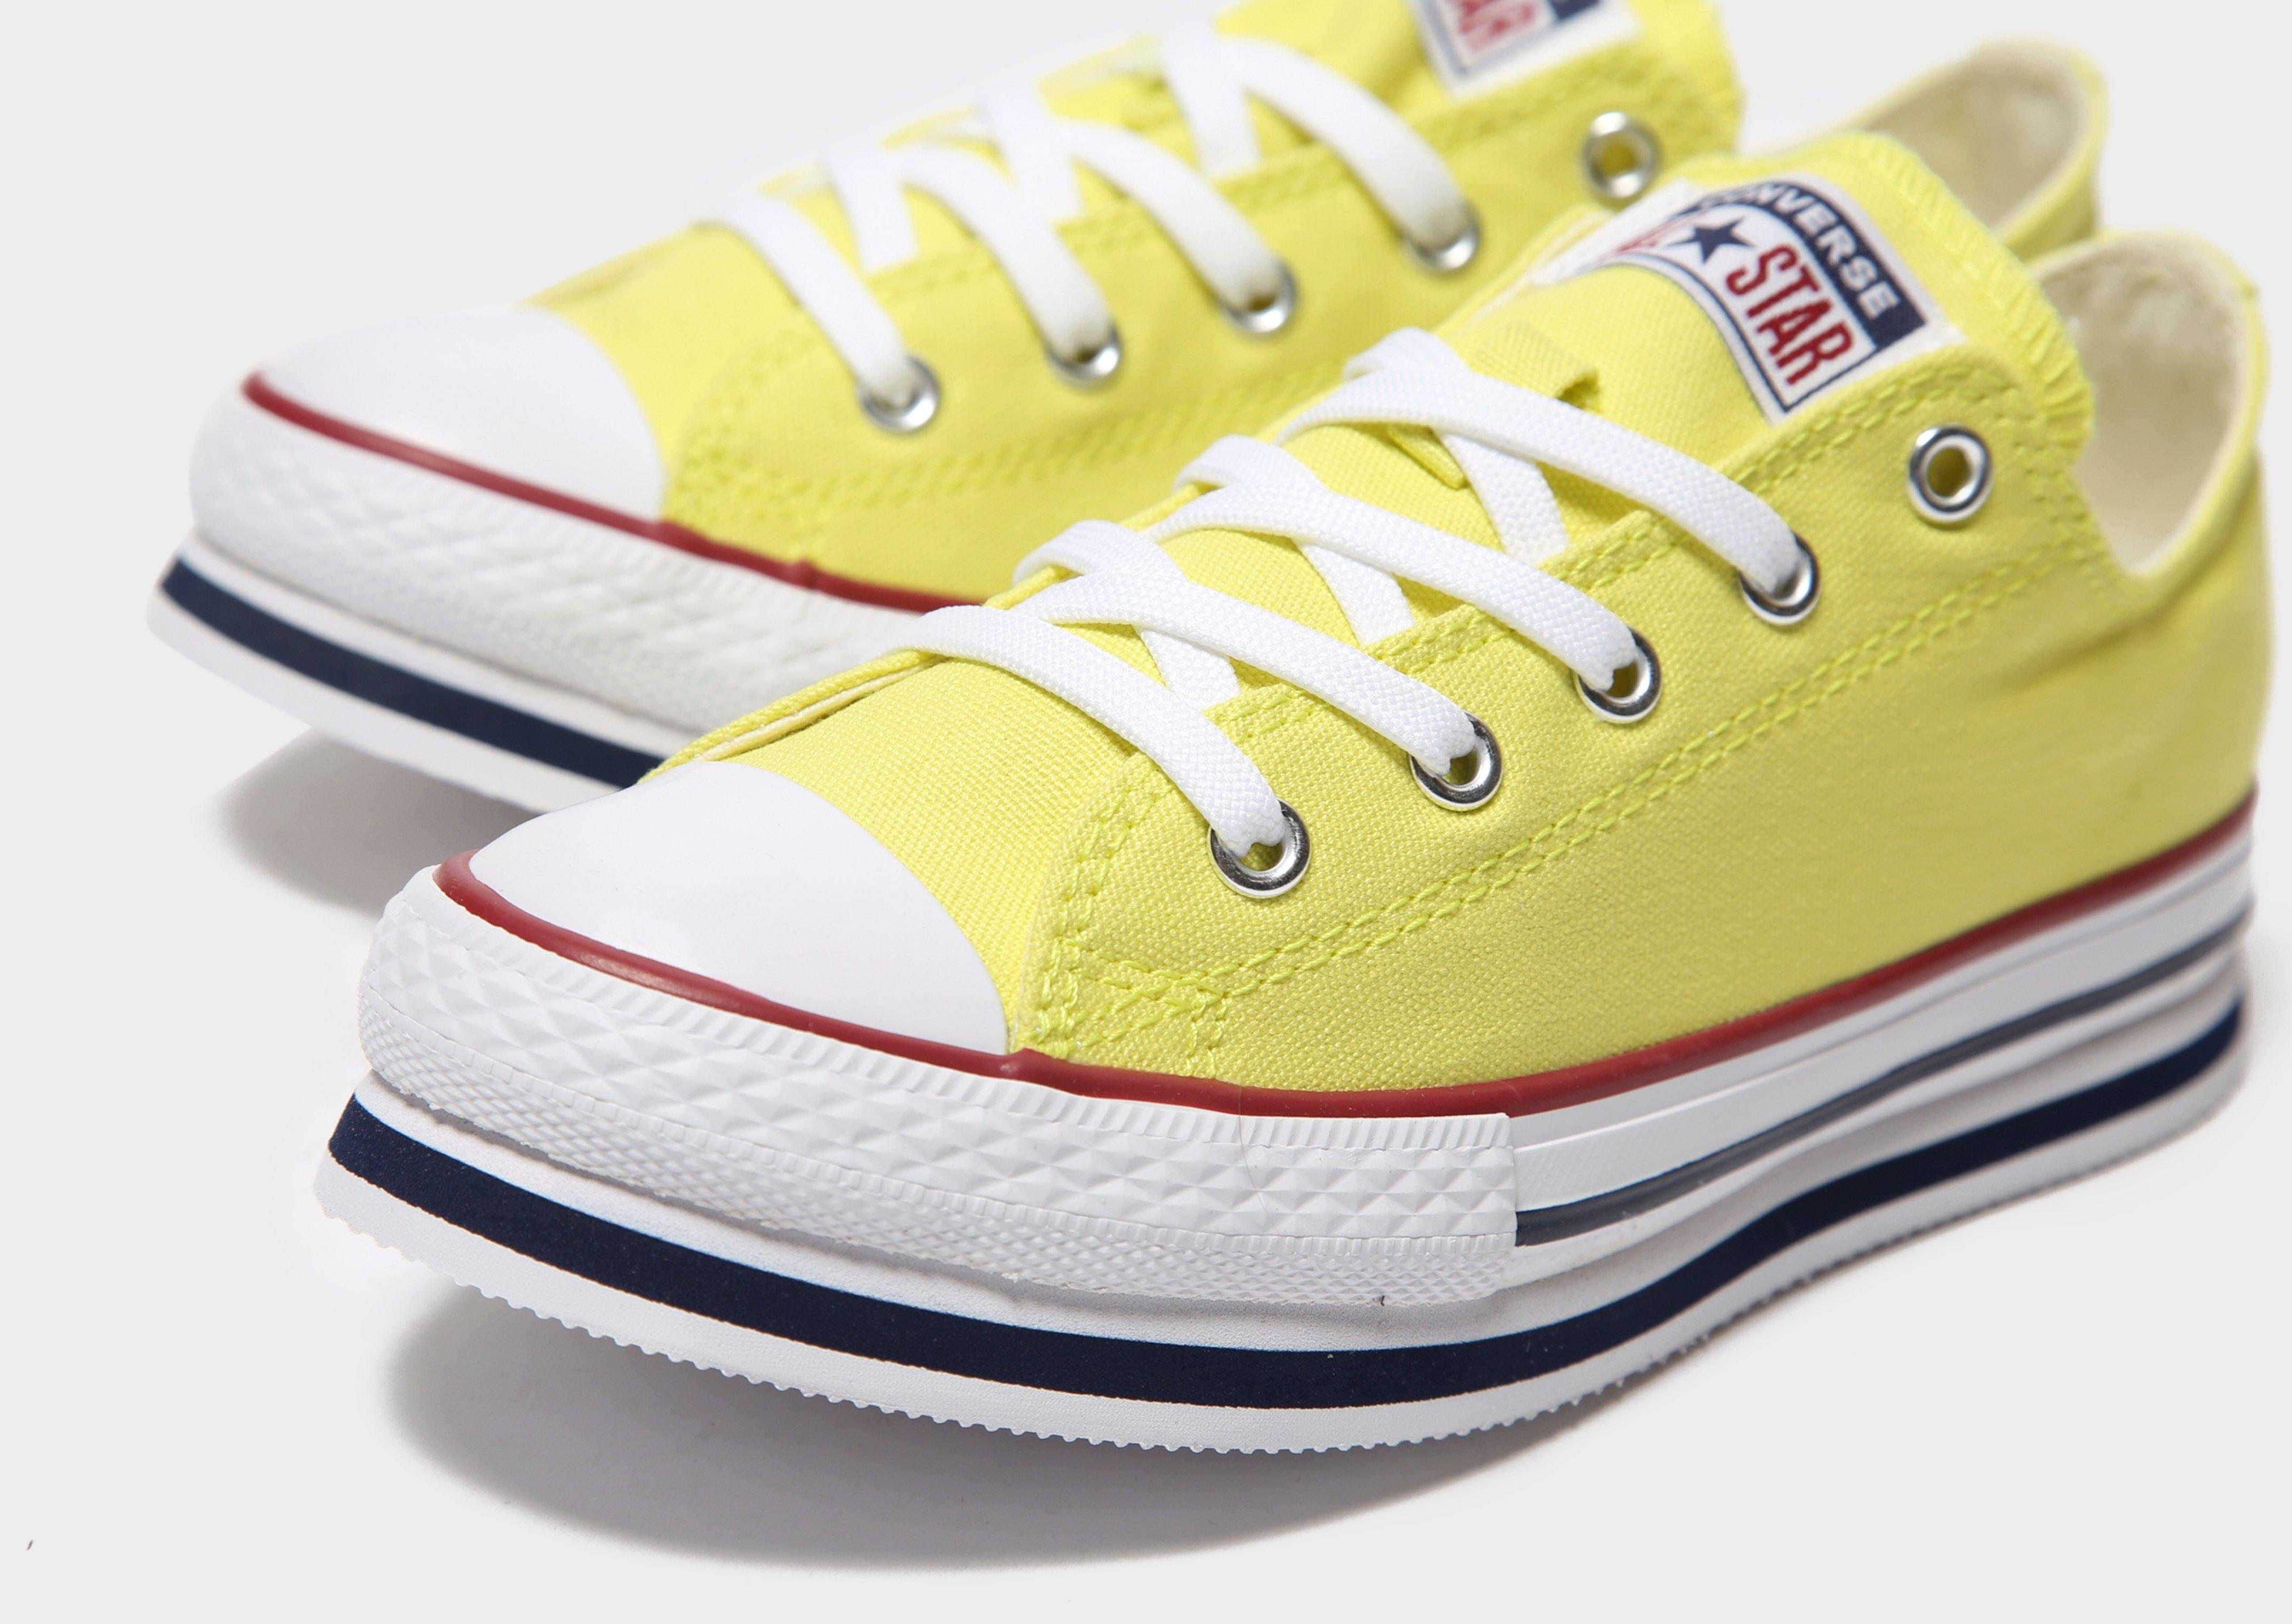 yellow converse infant